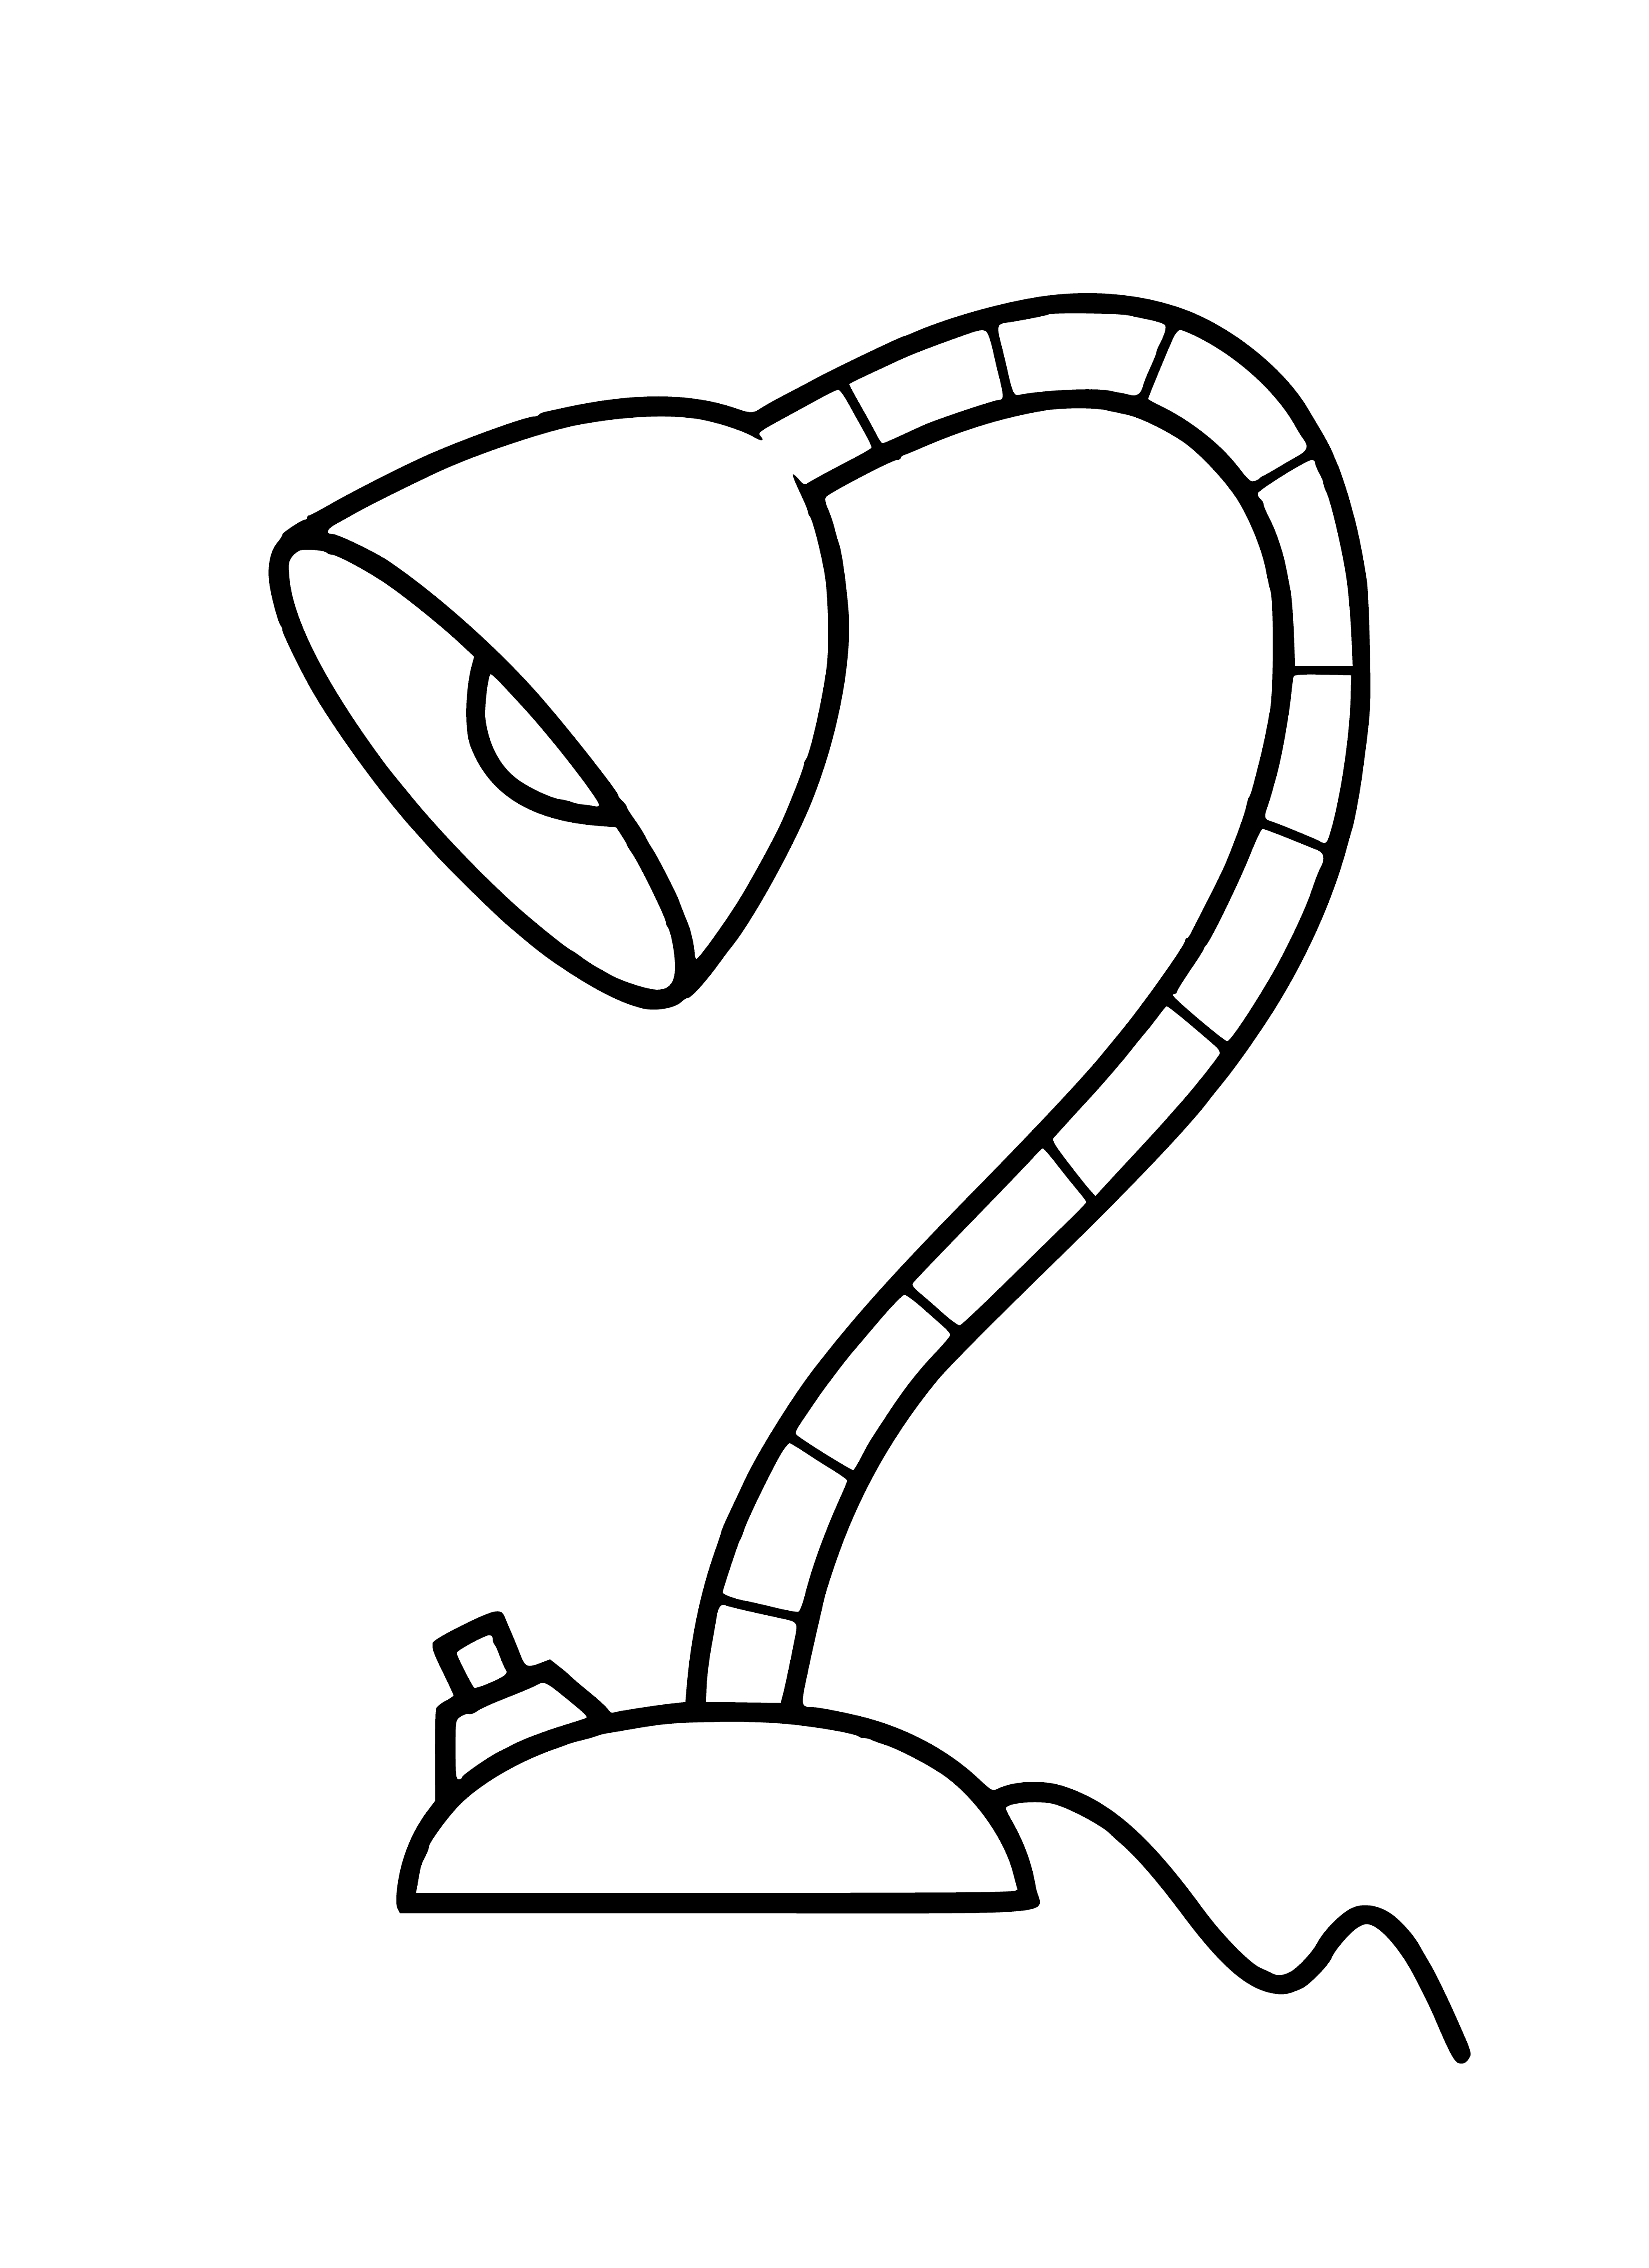 Table lamp coloring page